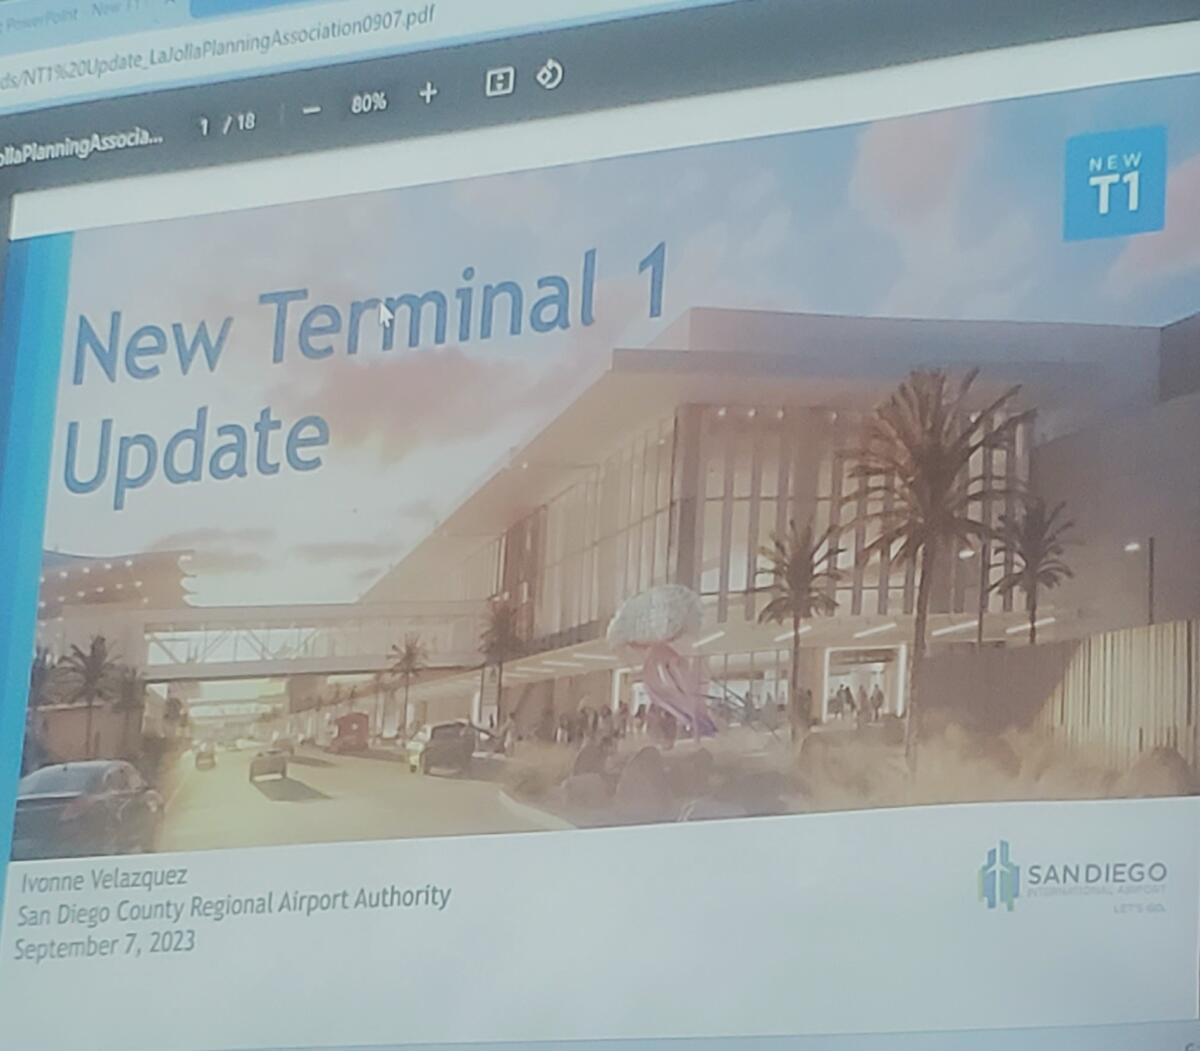 The La Jolla Community Planning Association is shown a rendering of the new San Diego International Airport Terminal 1.